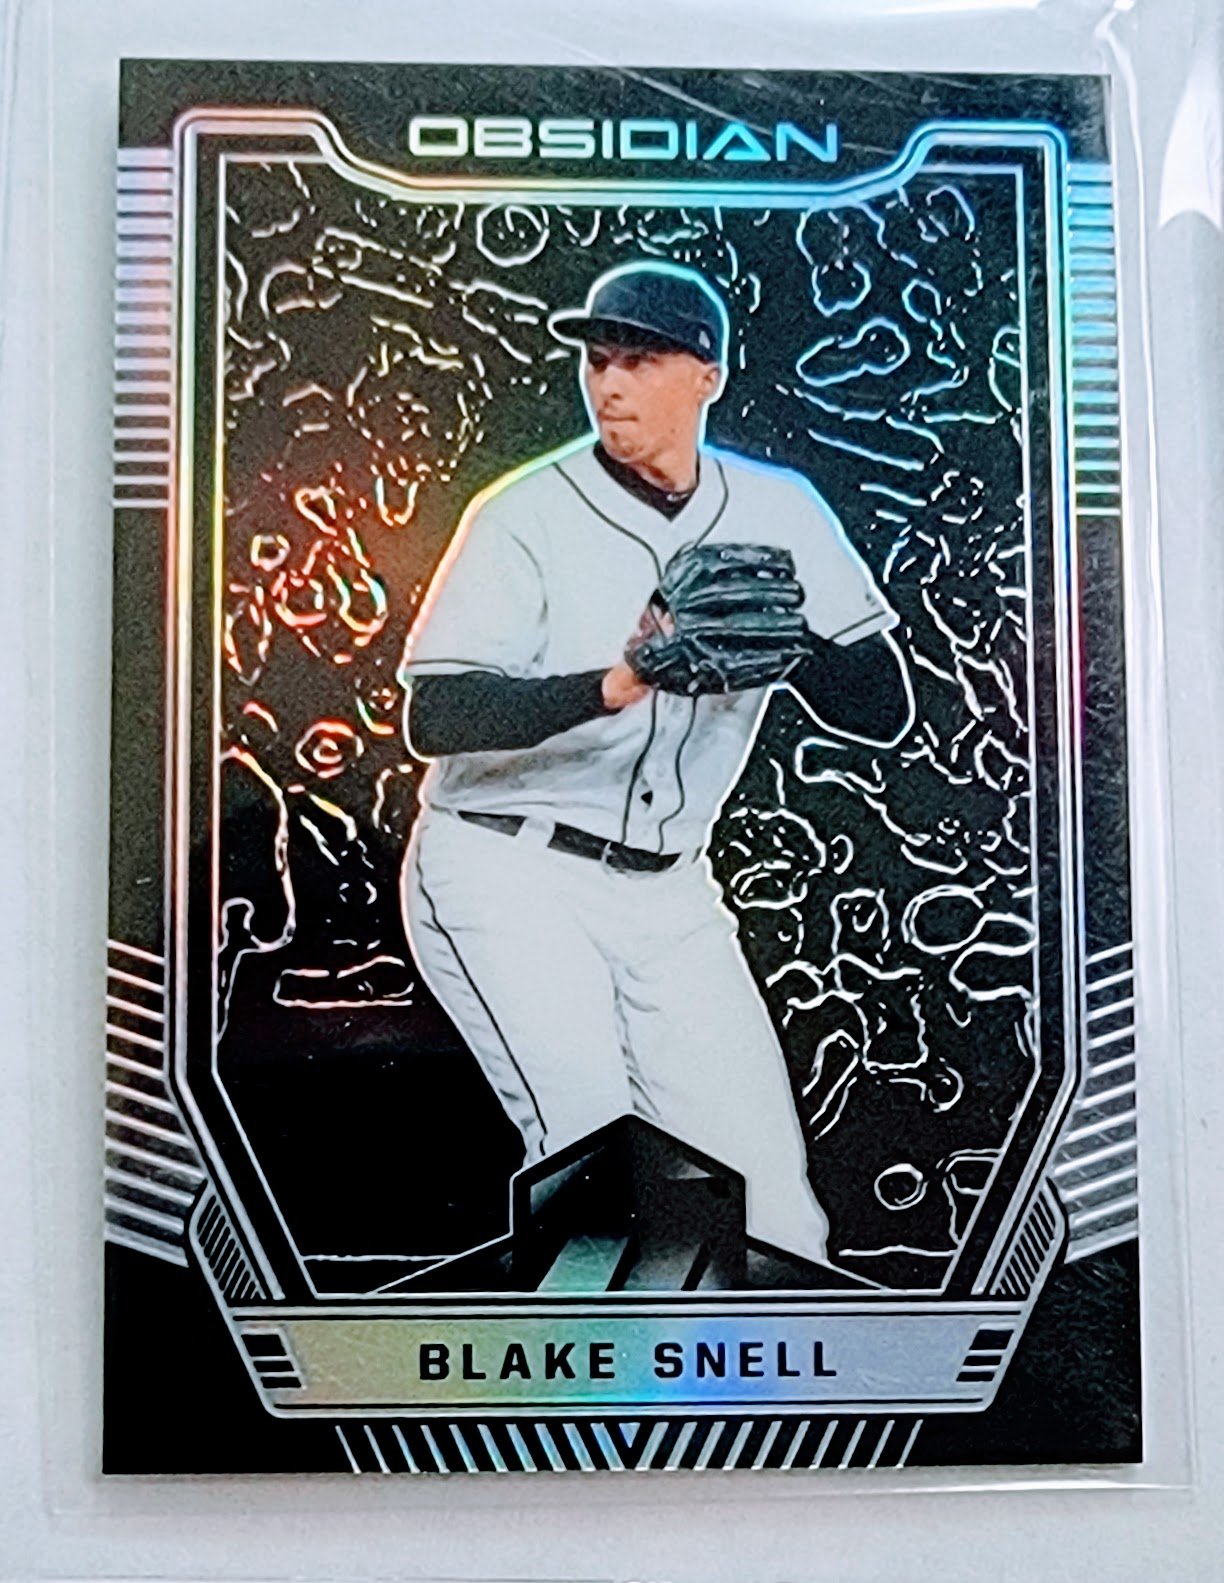 2019 Panini Chronicles Obsidian Blake Snell Electric Etch Refractor Baseball Card TPTV simple Xclusive Collectibles   